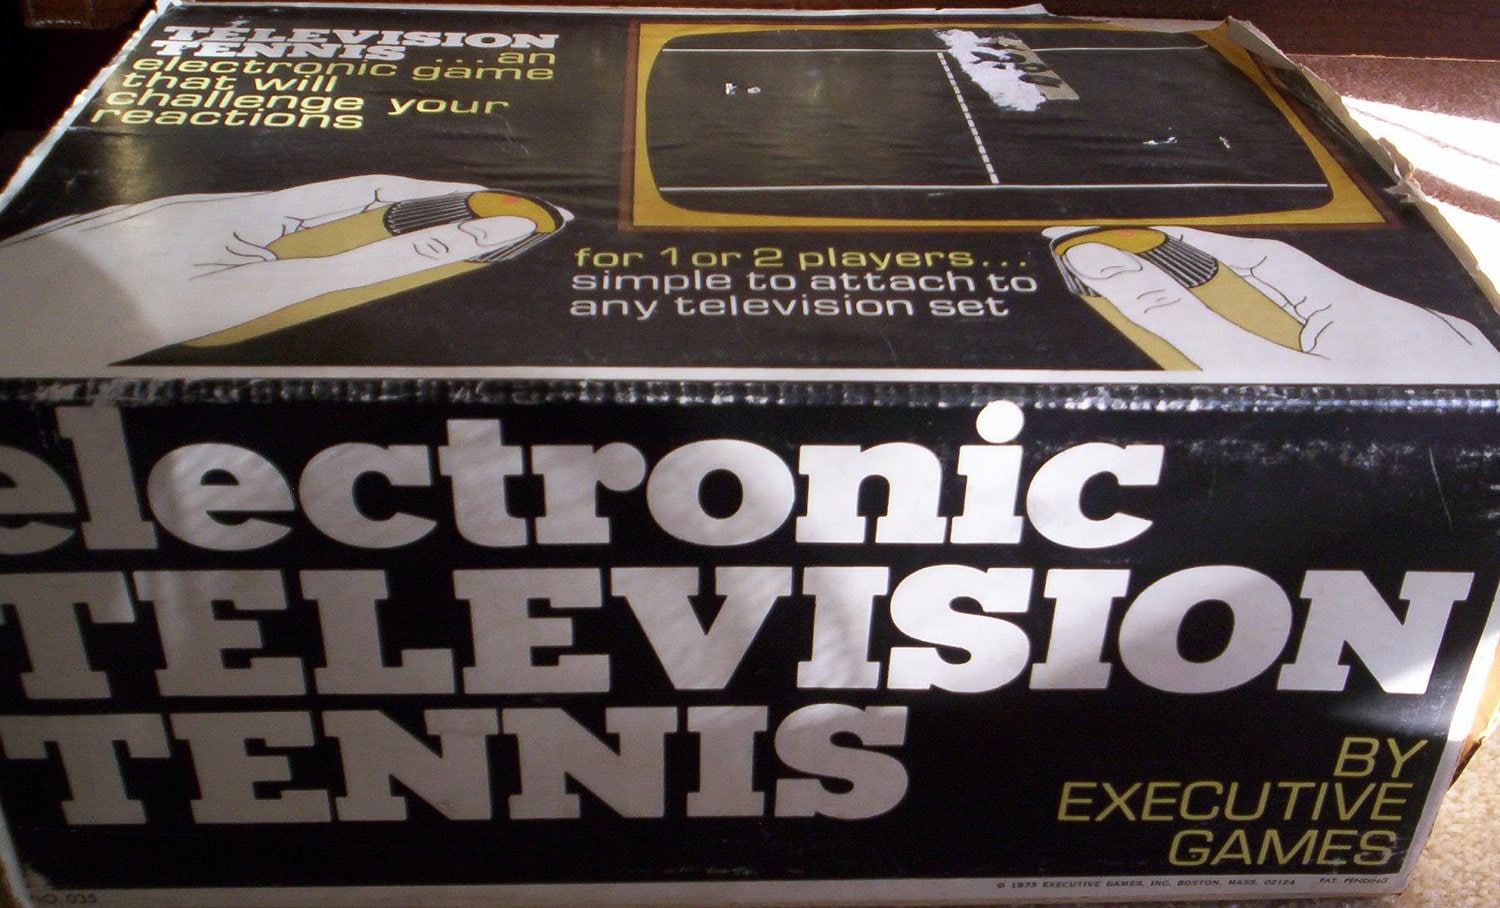 video tennis games from 70s